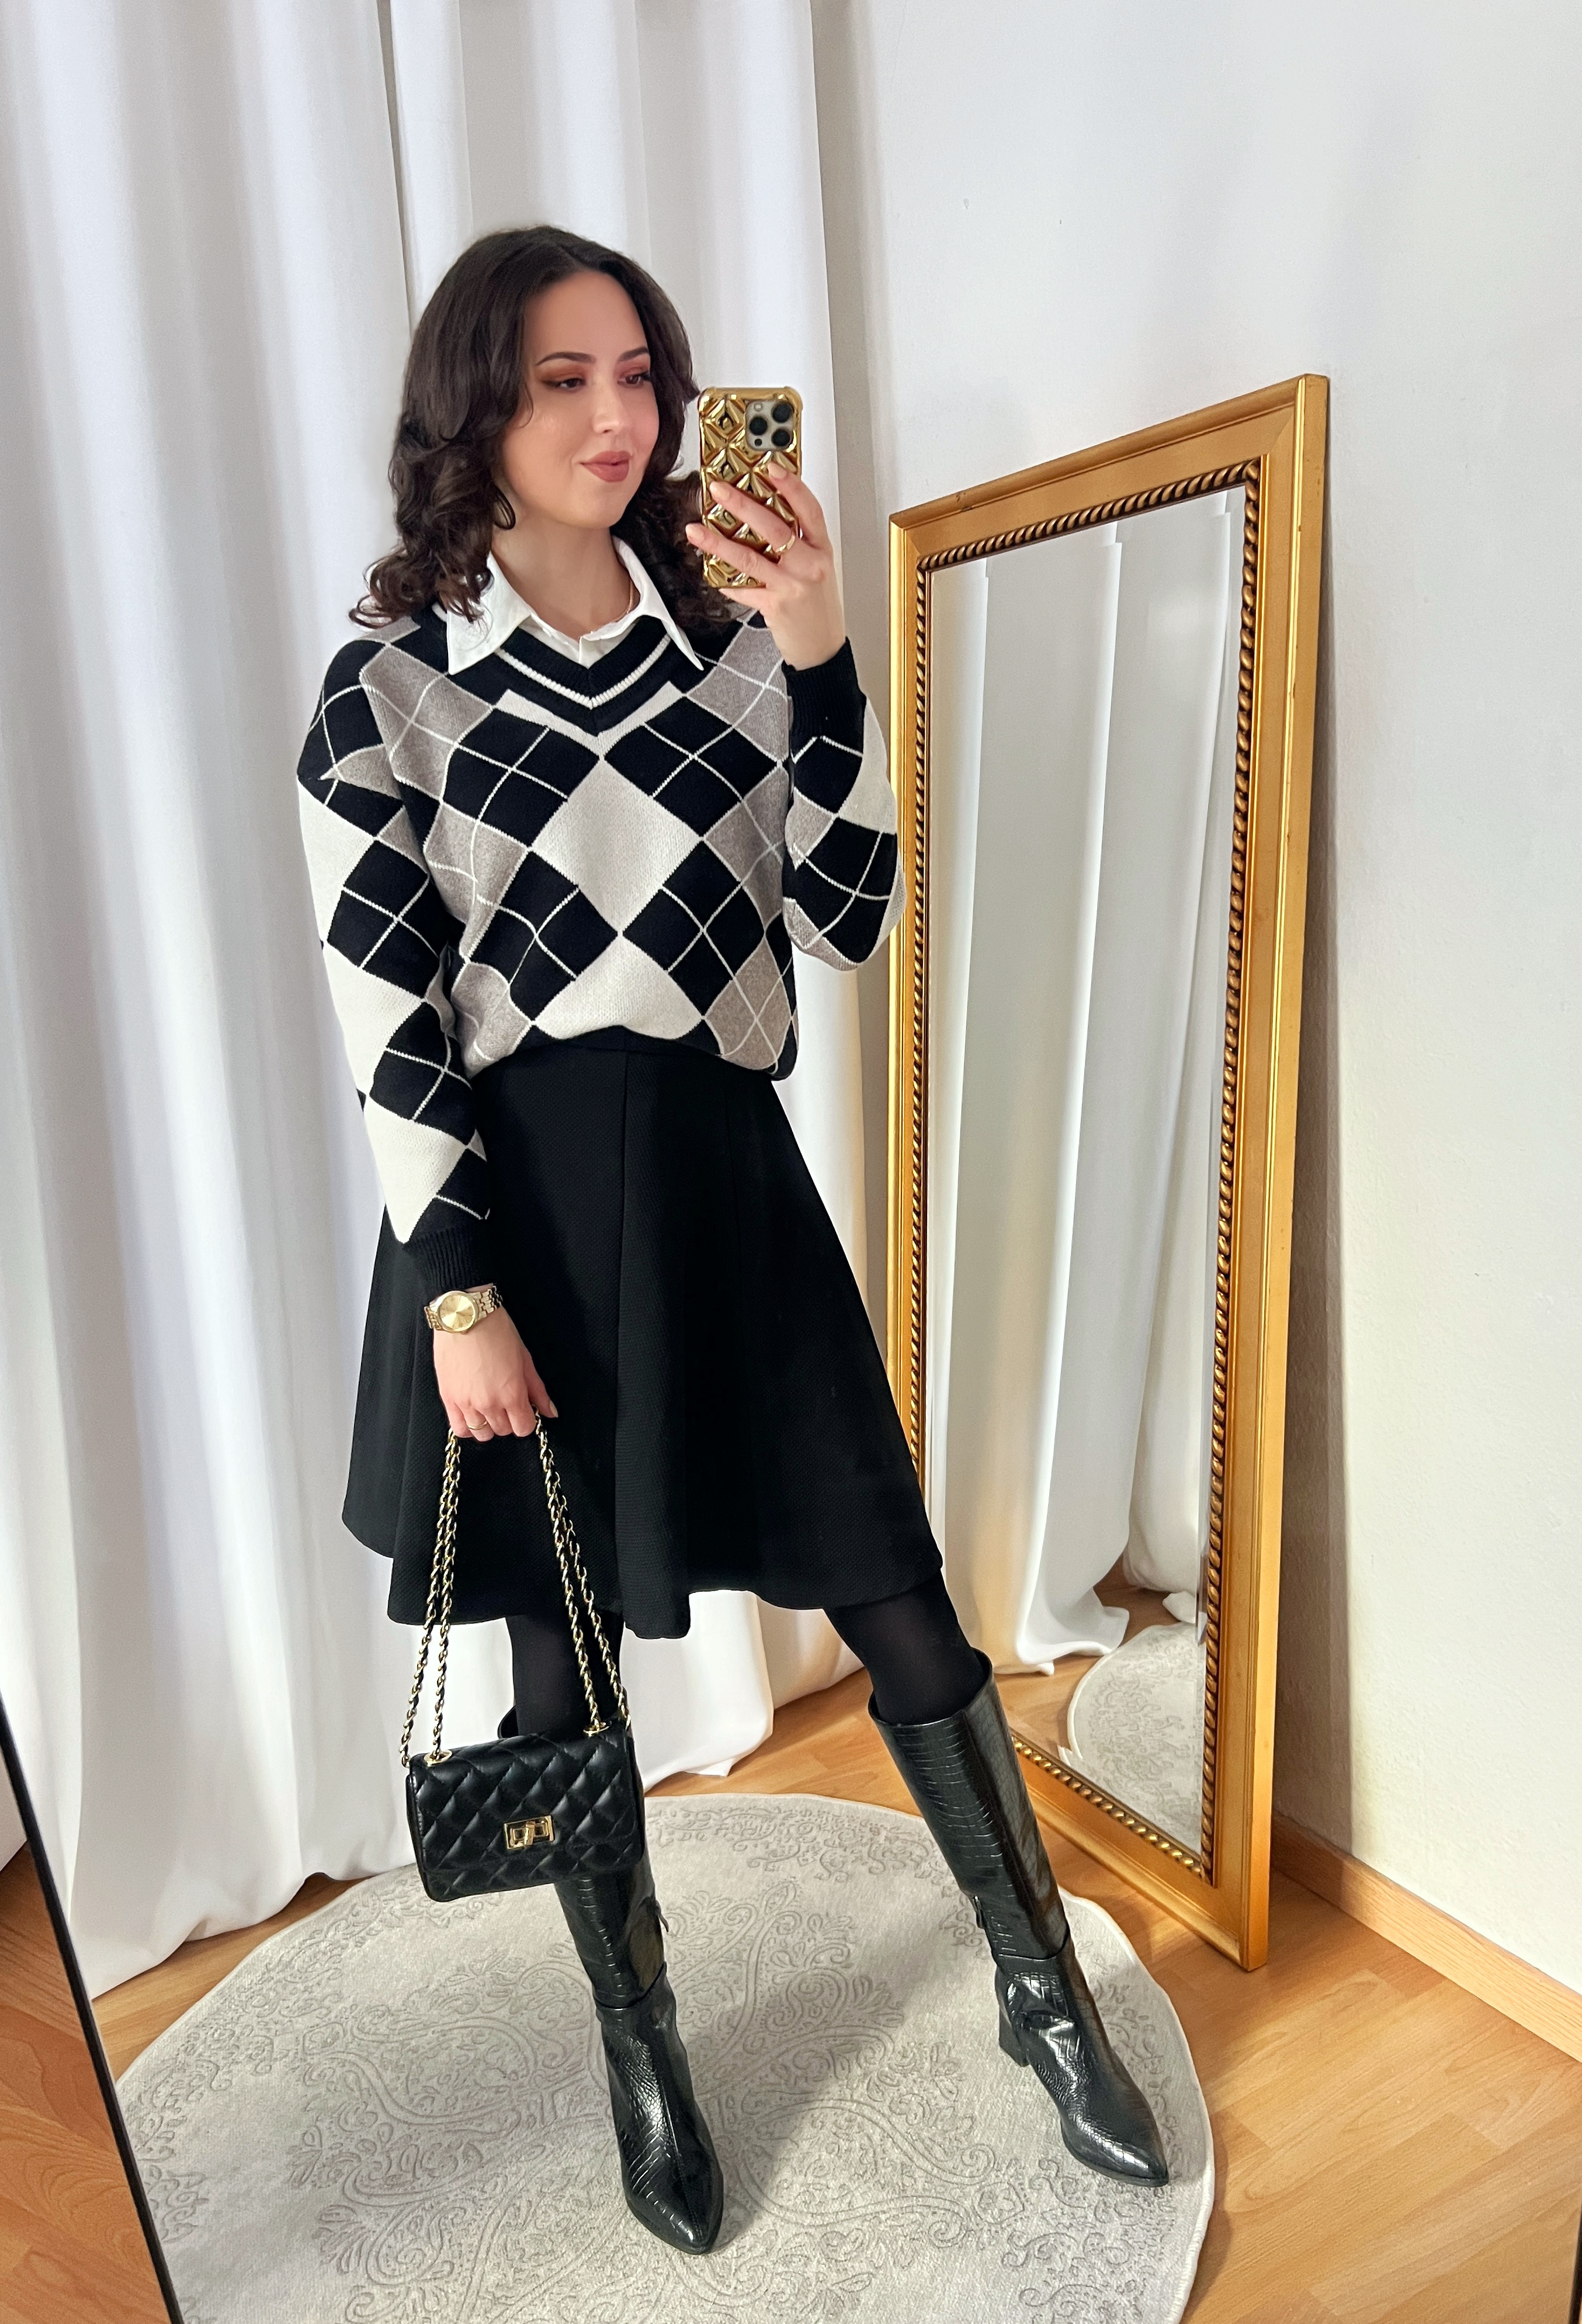 Black and White Argyle Sweater and Black Skirt Outfit